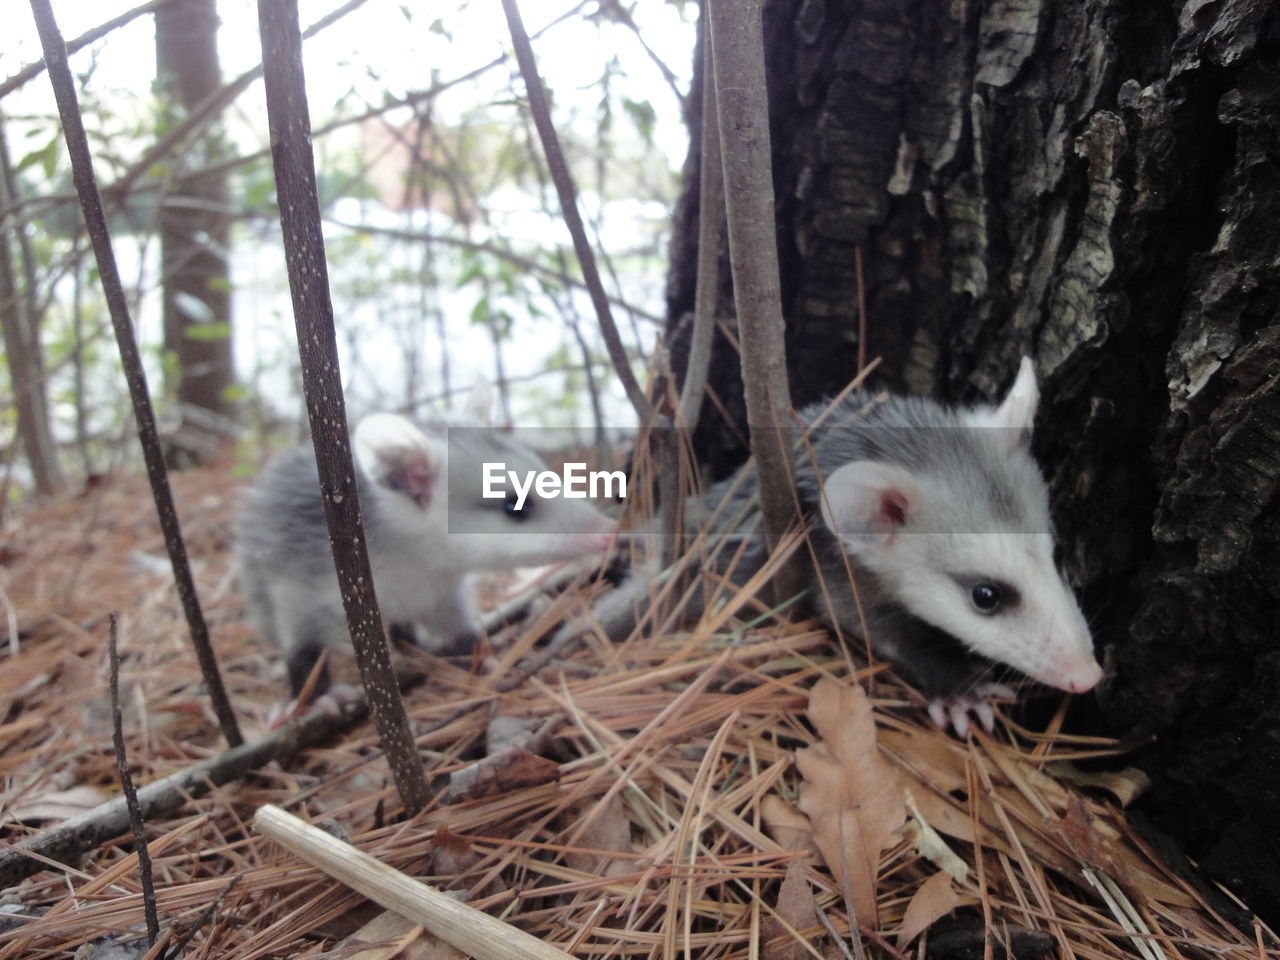 Possums by tree trunk in forest